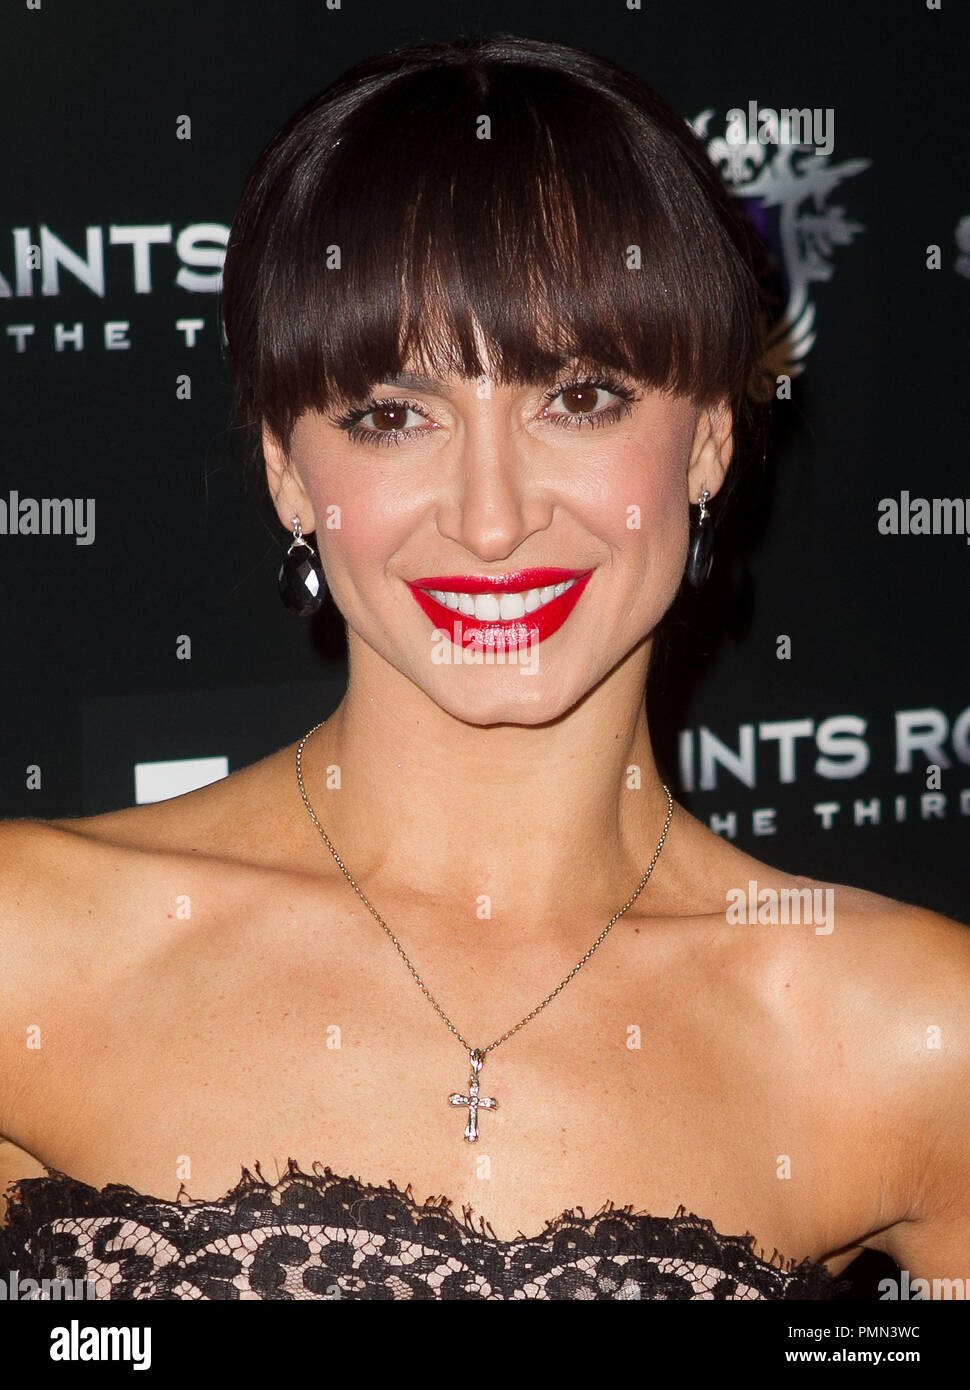 Karina Smirnoff at the 'Saints Row: The Third' THQ's Exclusive Premiere Event at SupperClub in Hollywood, CA on Wednesday, October 12, 2011. Photo by Eden Ari PRPP/ PictureLux Stock Photo